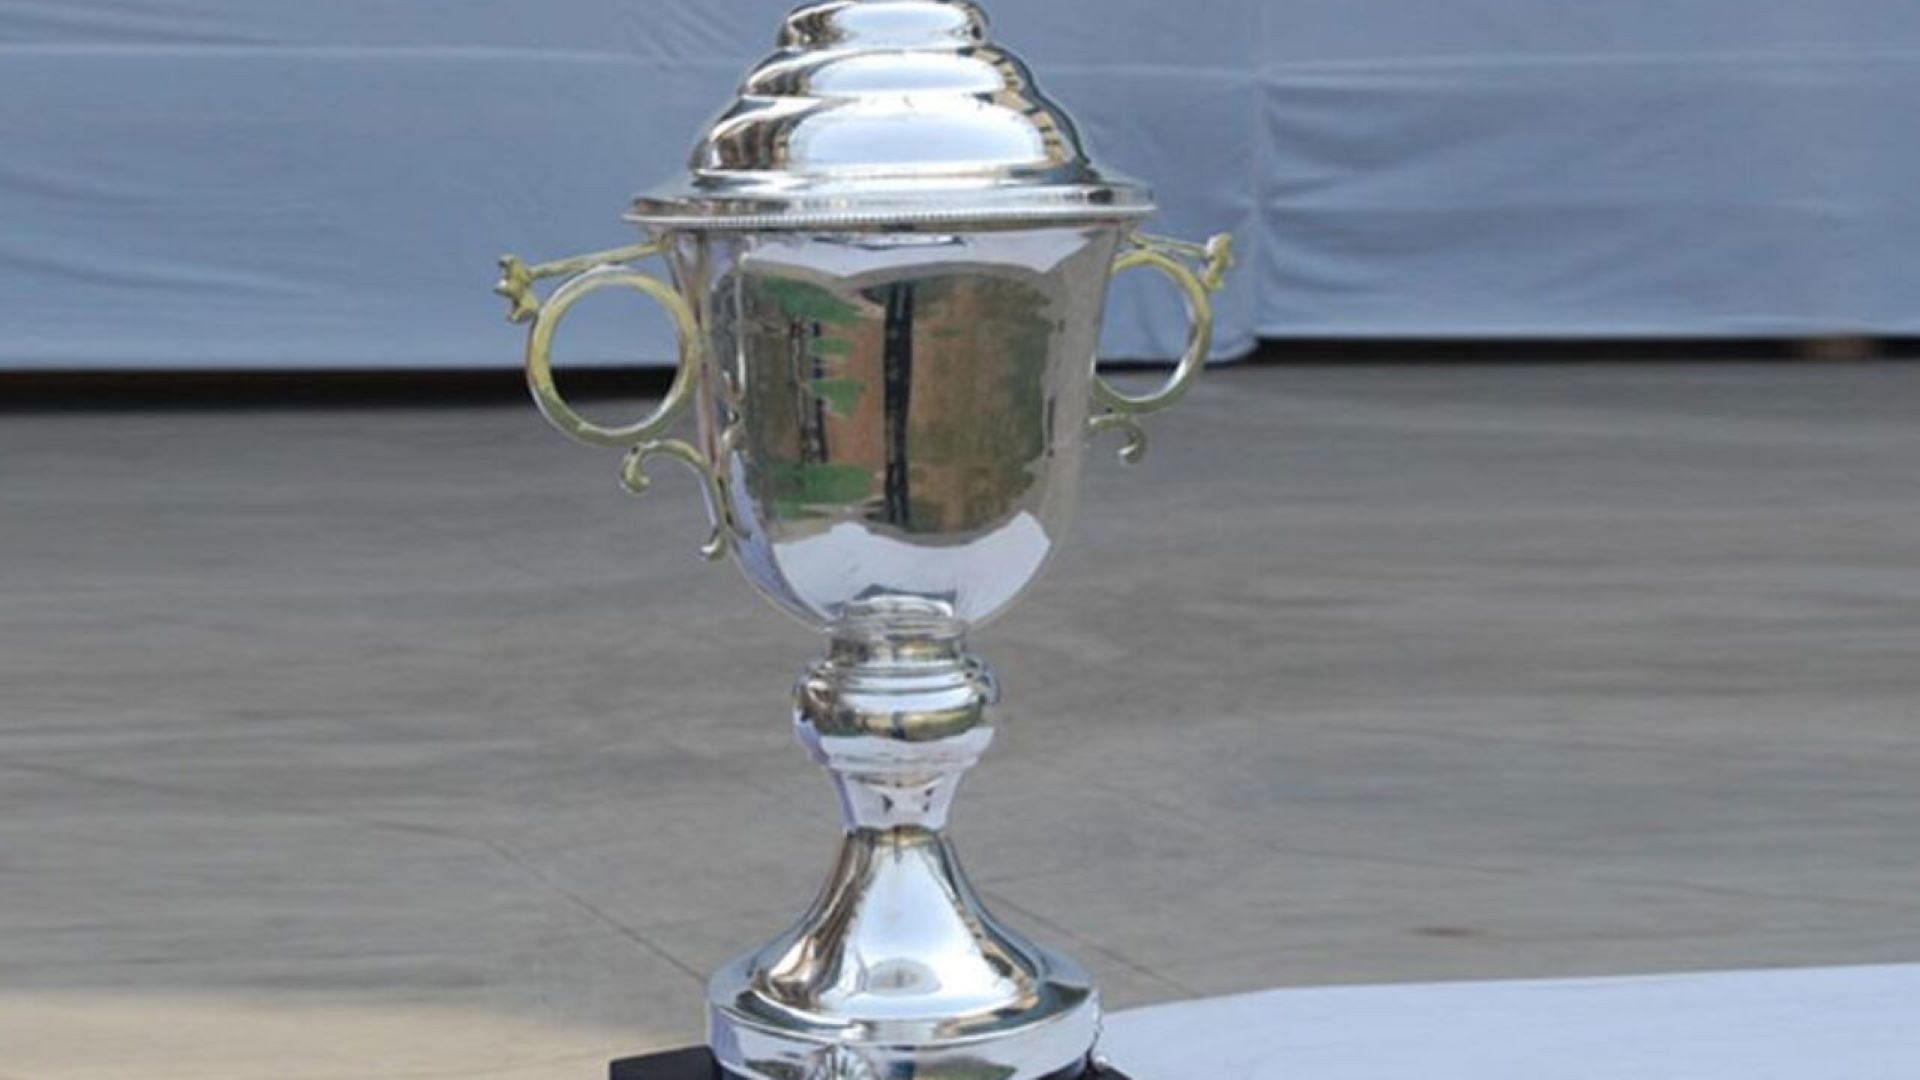 The Deodhar Trophy will likely be part of India